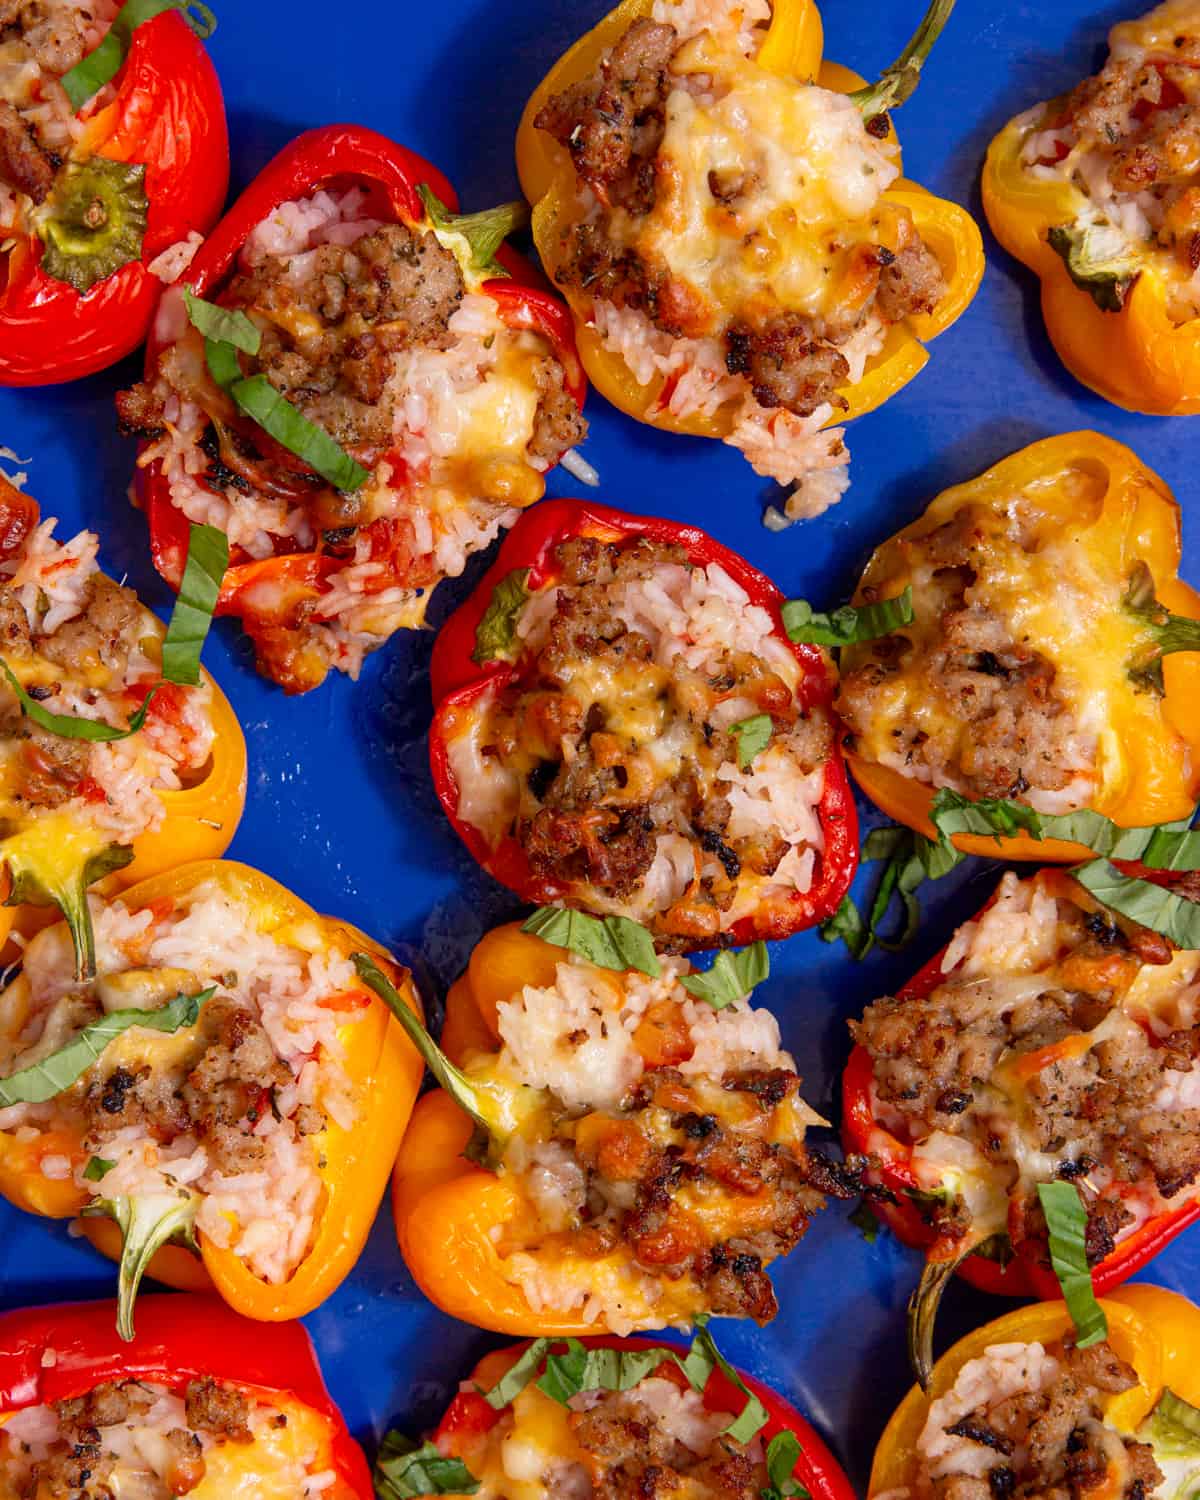 Sausage Stuffed Peppers